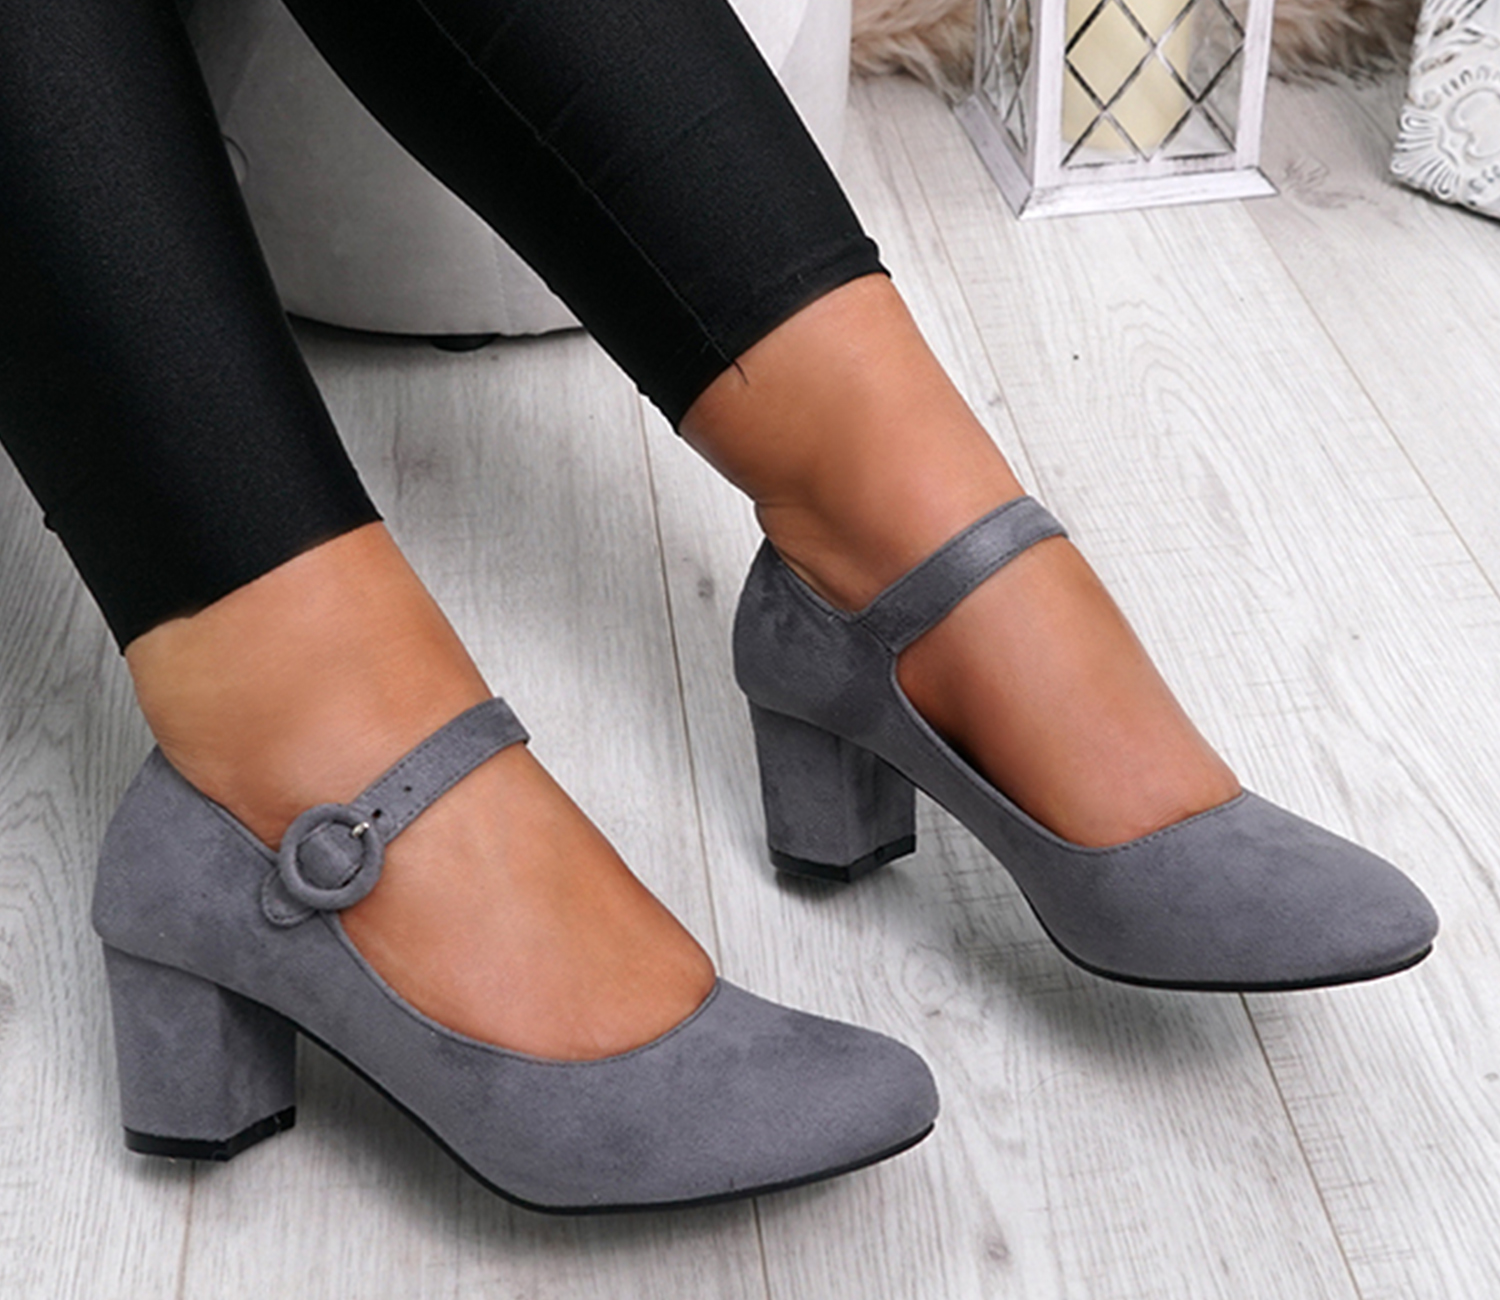 NEW WOMENS MARY JANE BLOCK HEEL PUMPS BUCKLE CASUAL COMFY SHOES SIZE UK ...